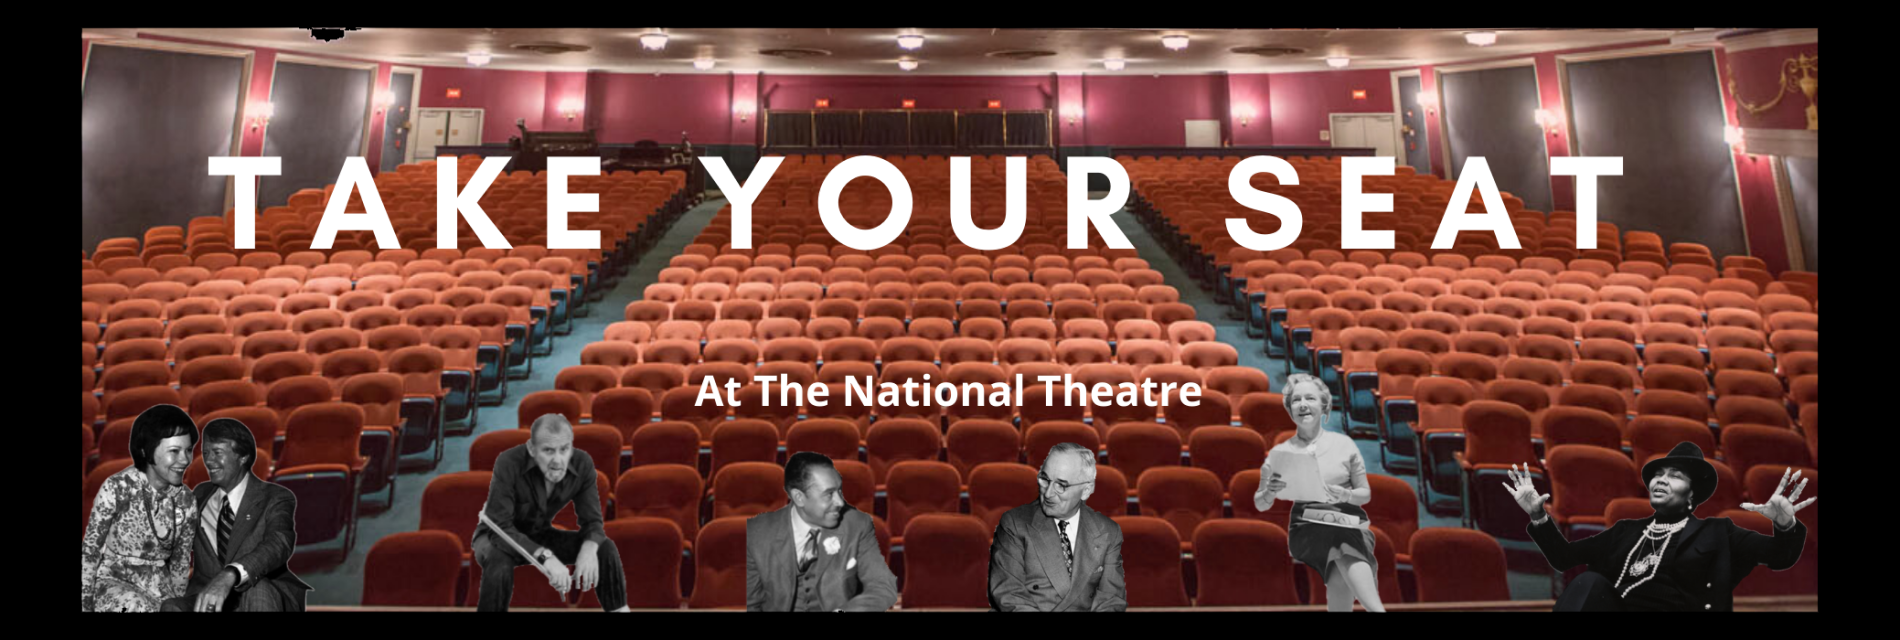 Slide 4: Dedicate a Seat at The National Theatre